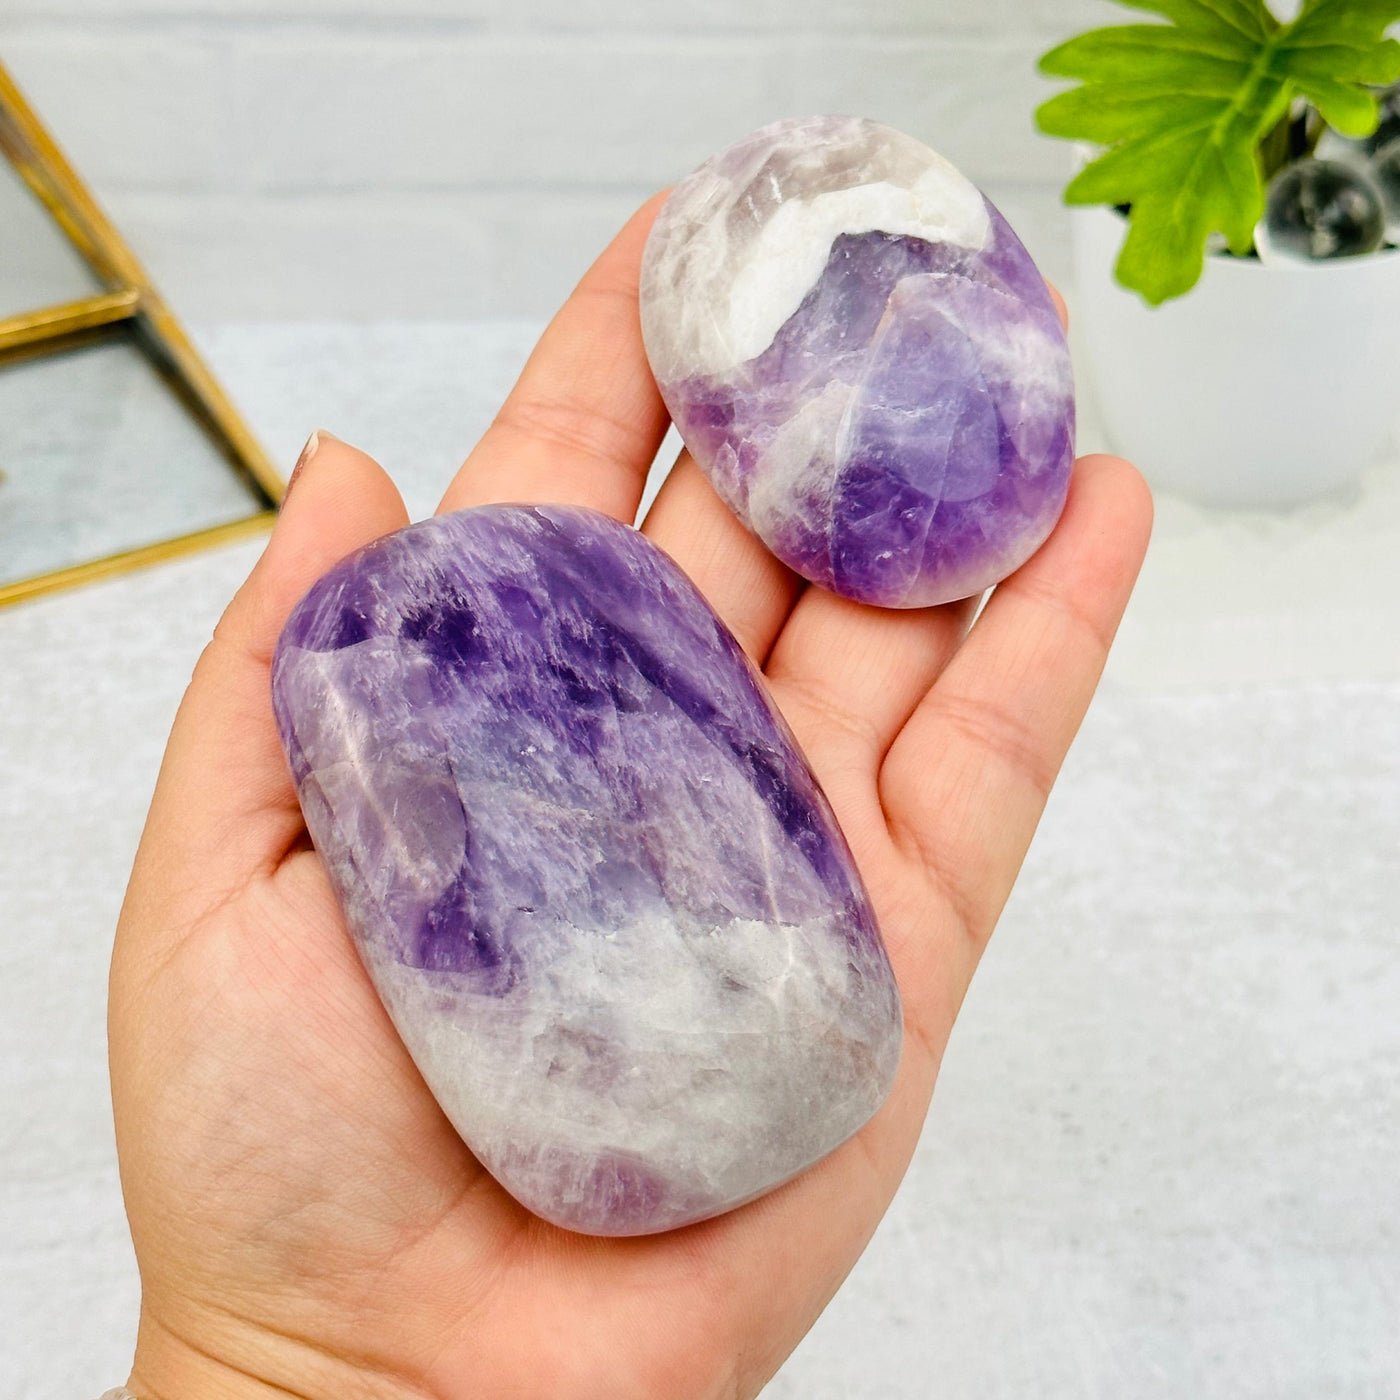 Chevron Amethyst Palm Stones in hand for size reference 